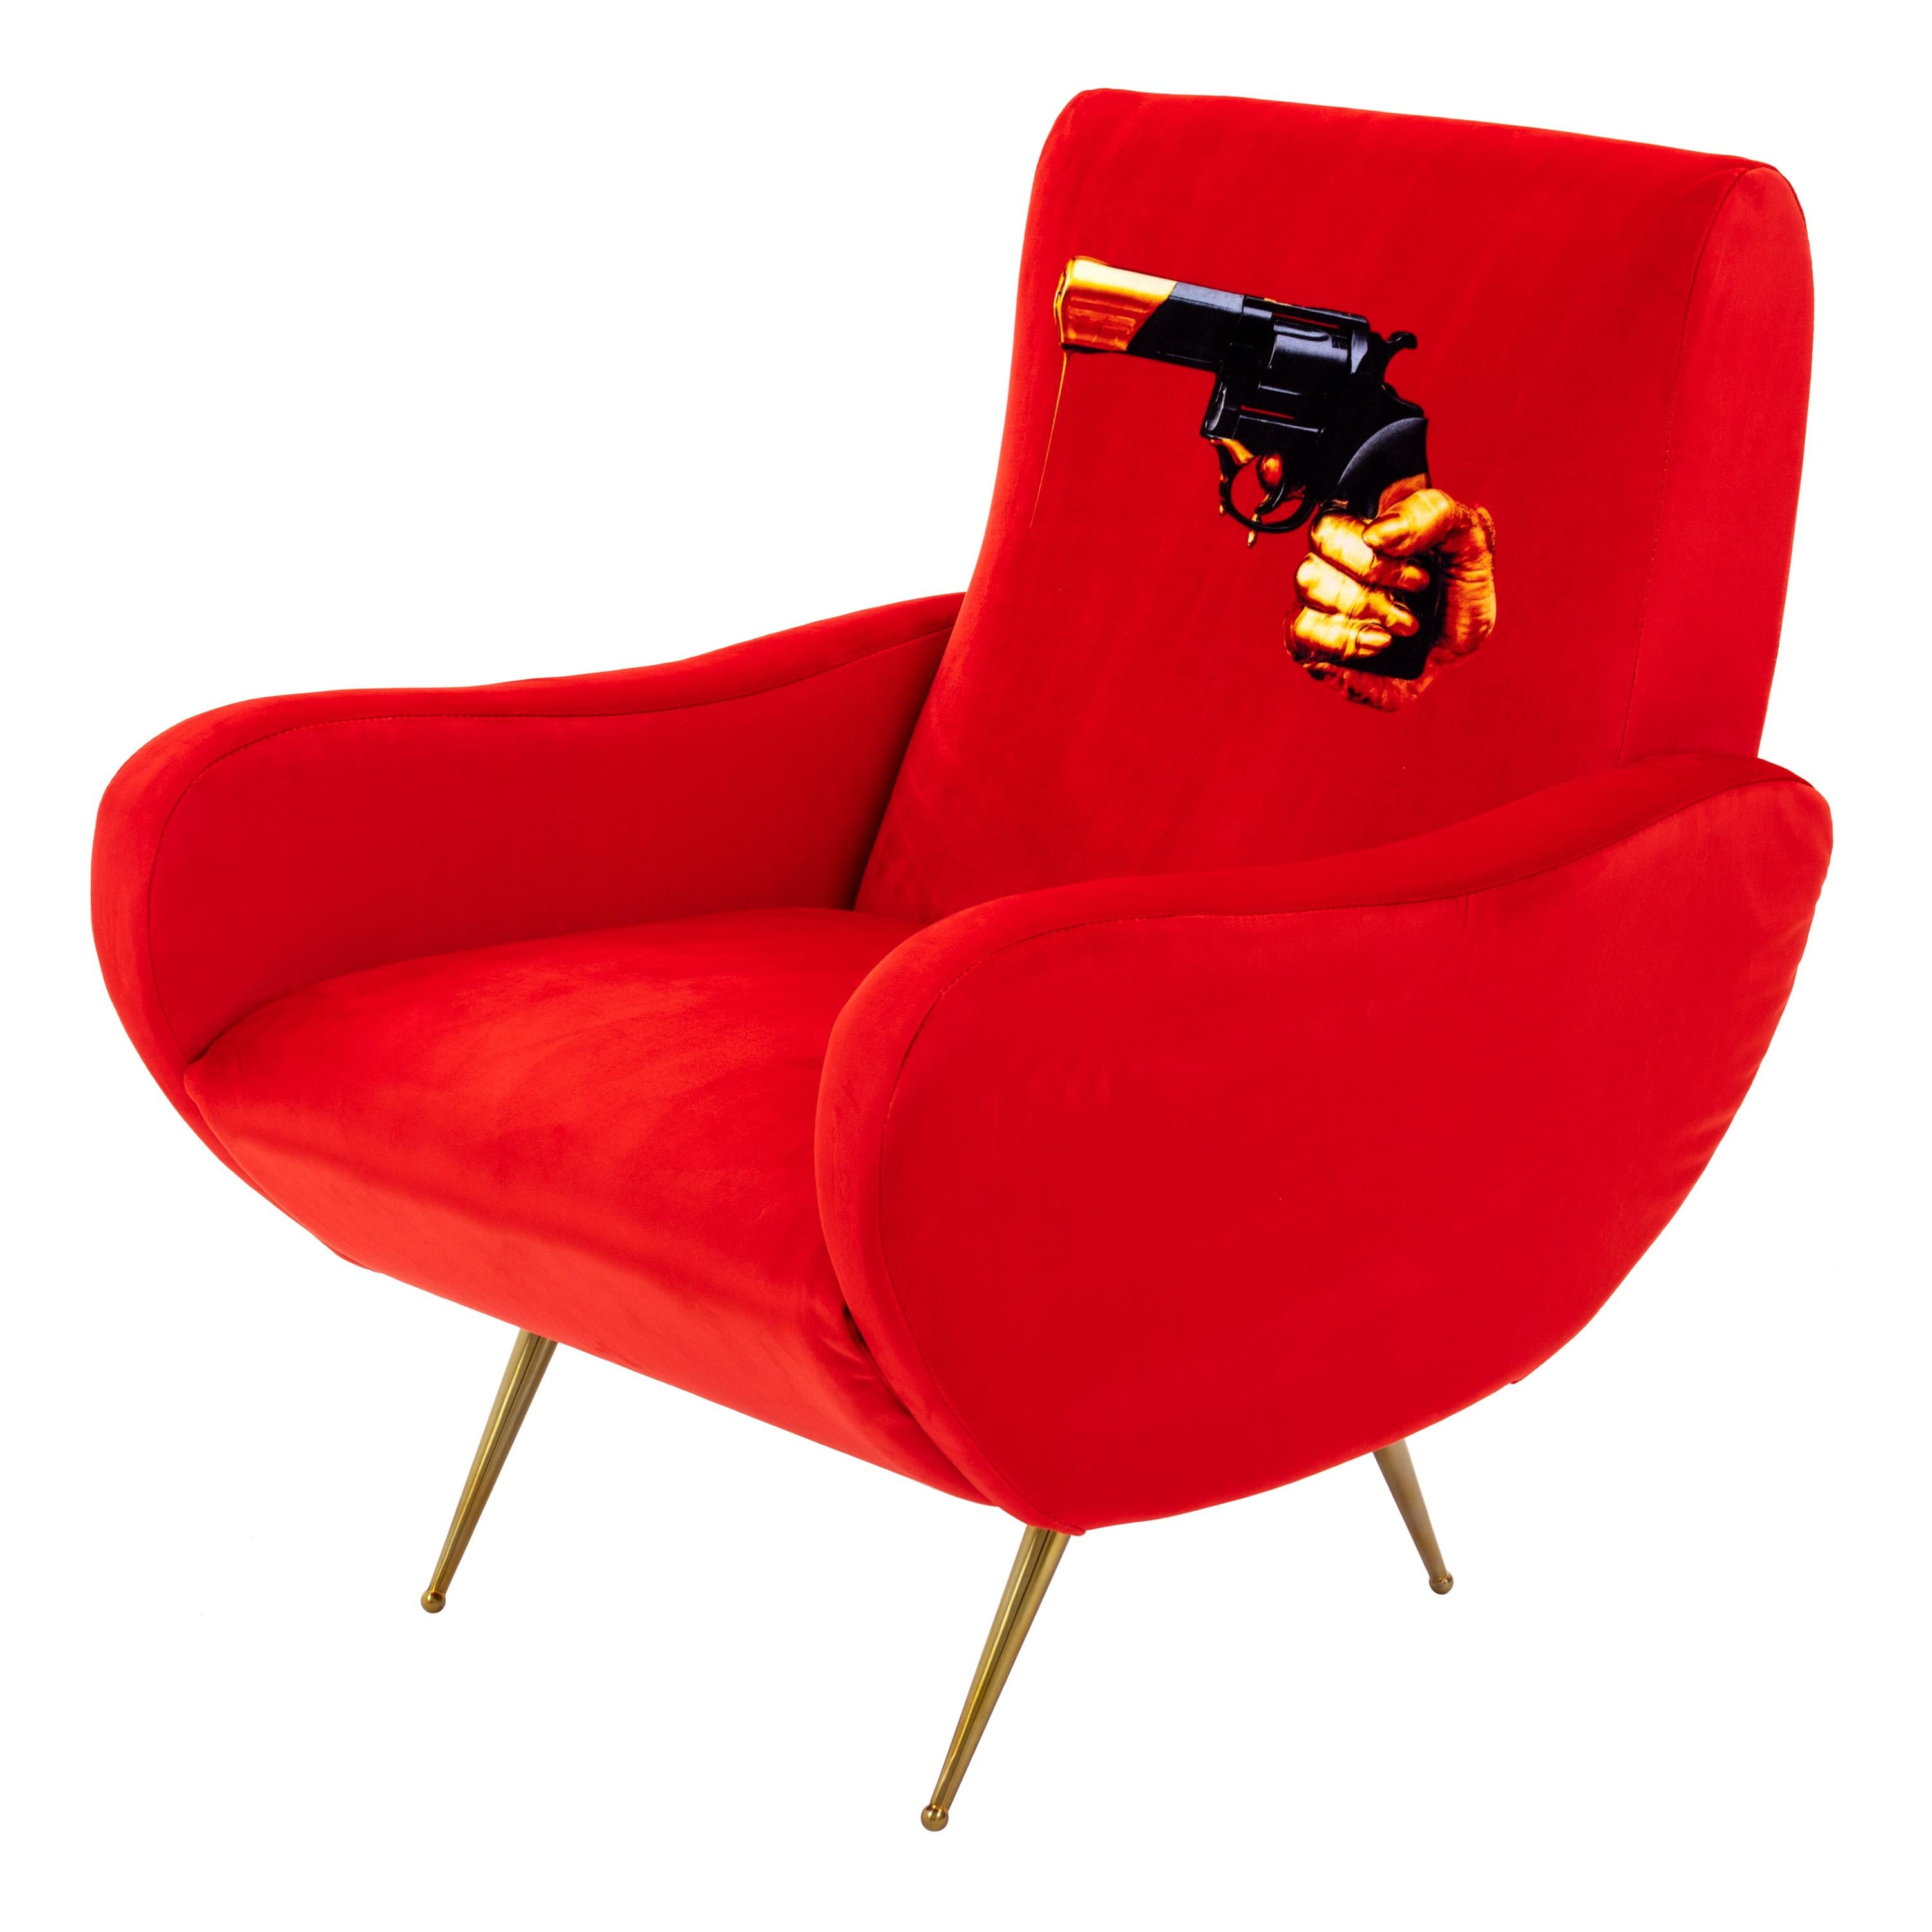 Seletti "Revolver" Upholstered Armchair by Toiletpaper Magazine For Sale